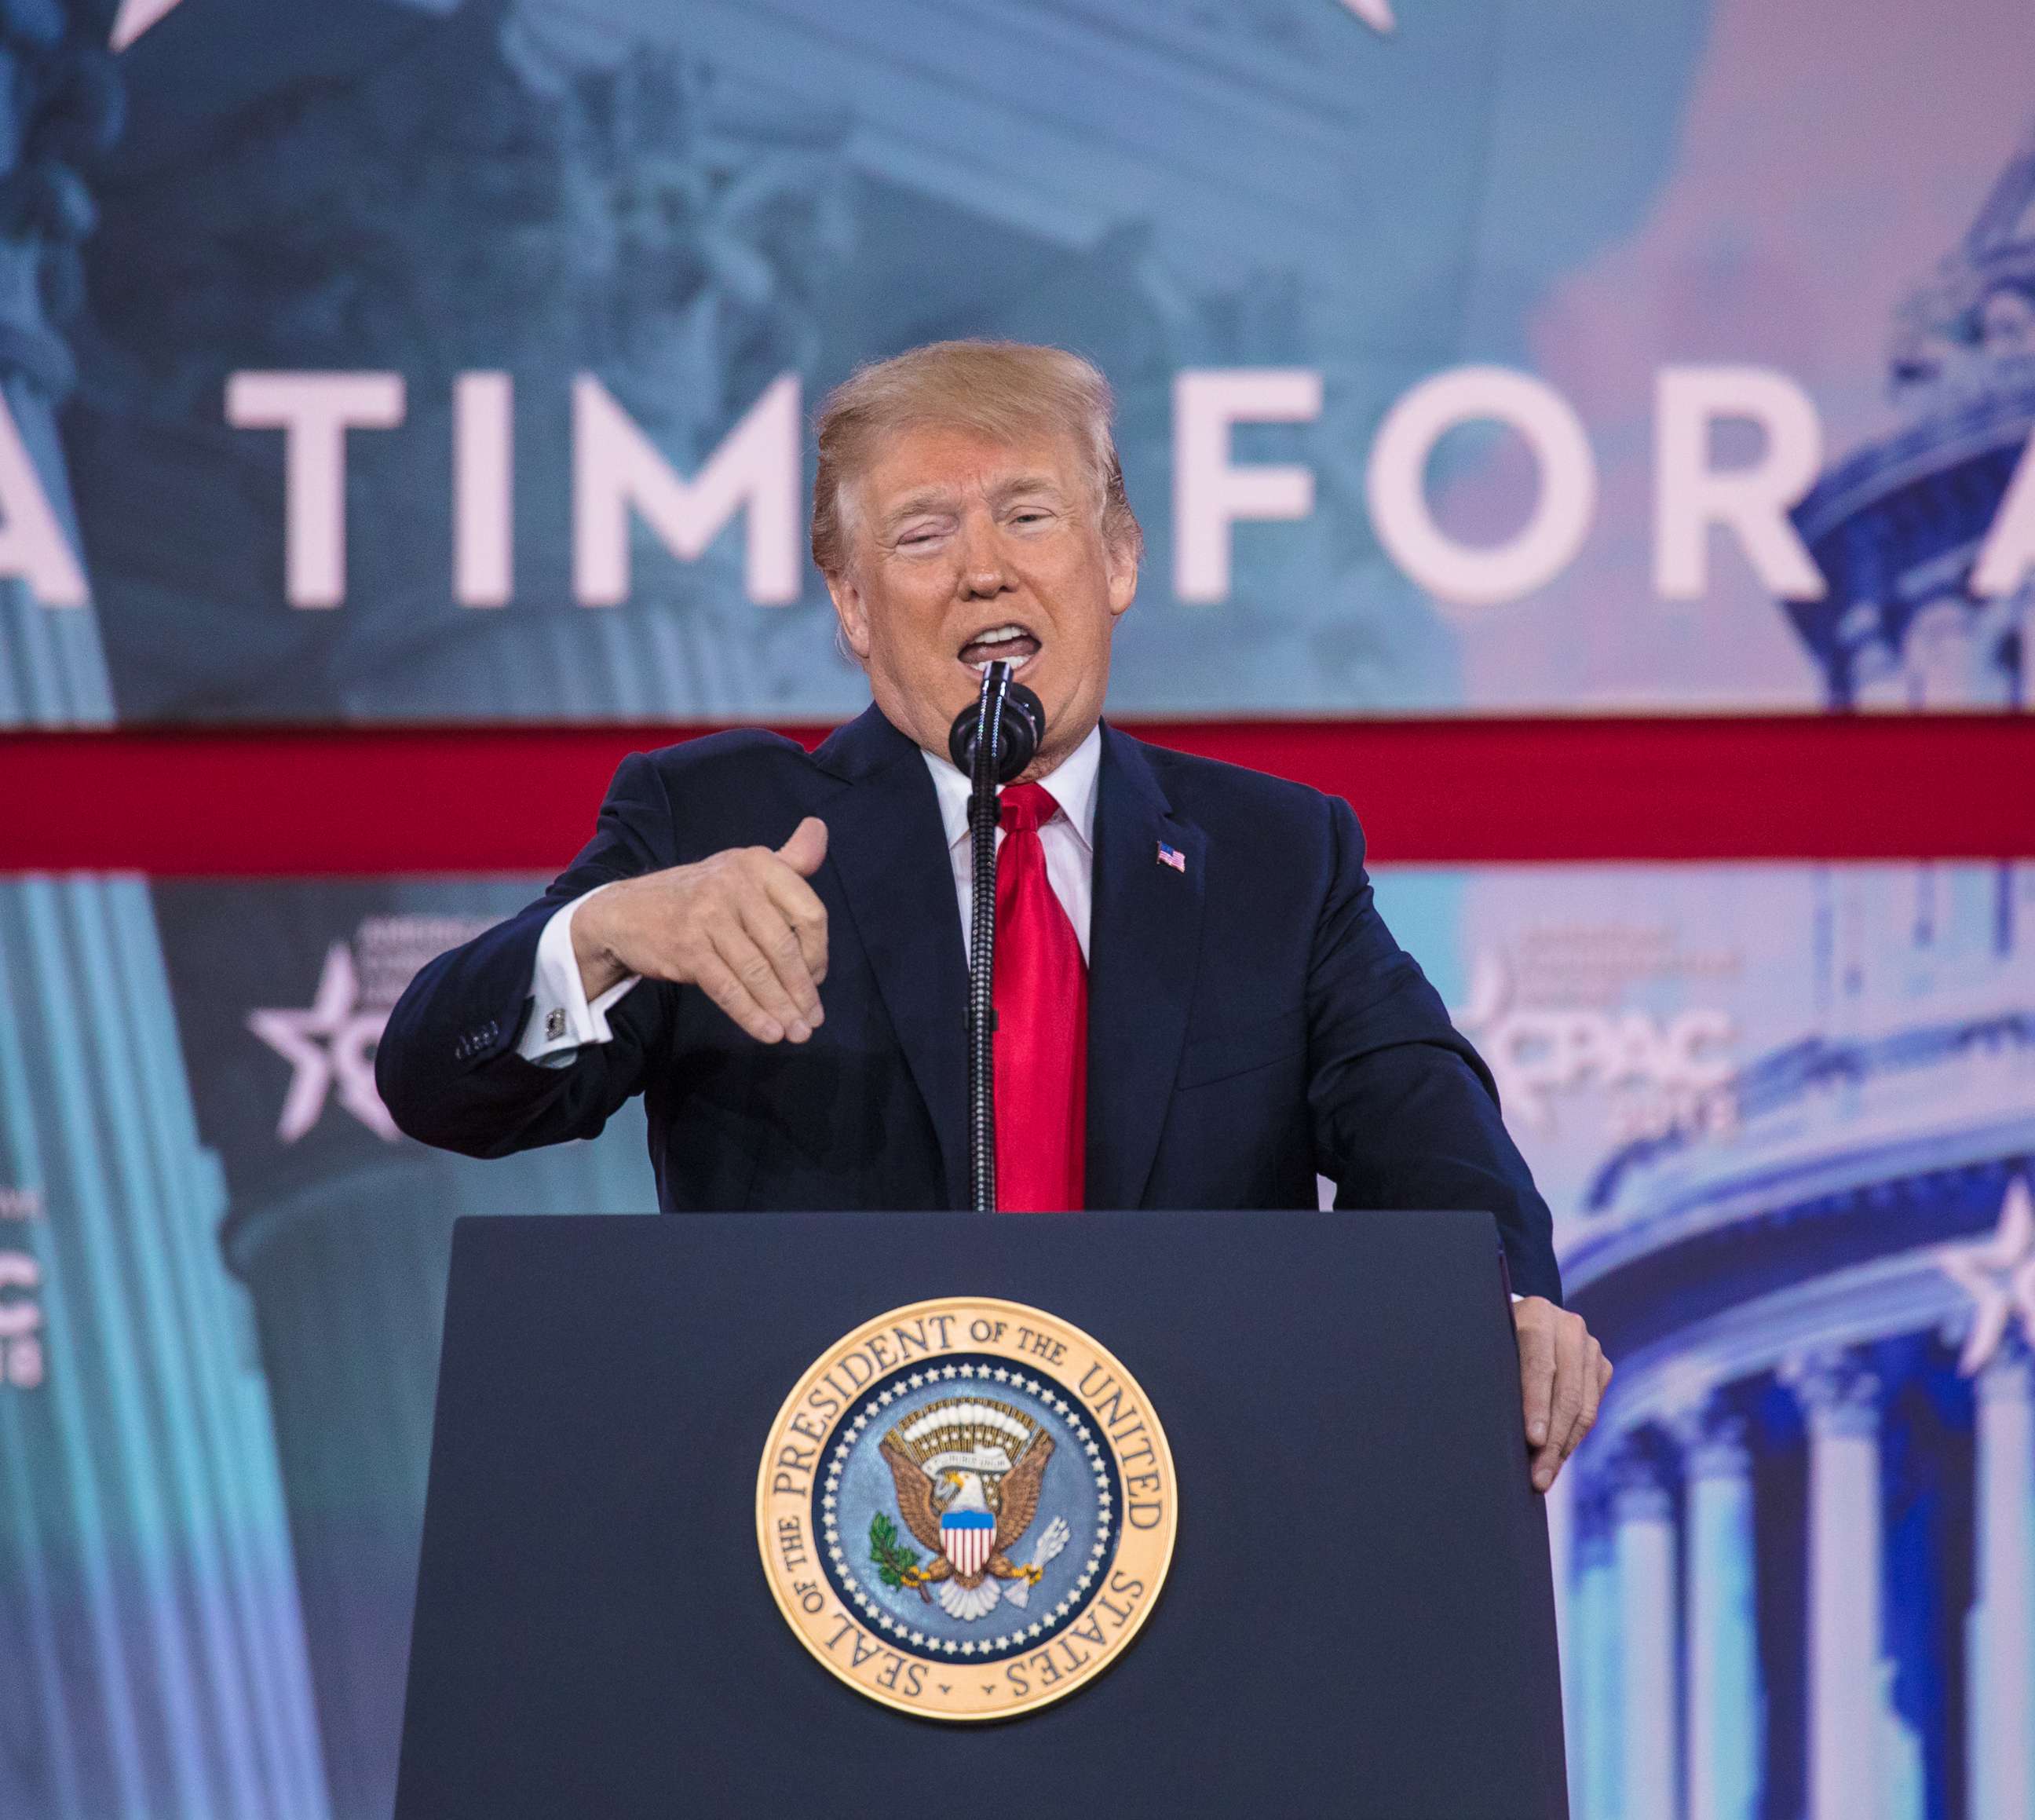 PHOTO: President Donald Trump speaks at the 2018 Conservative Political Action Conference (CPAC) in National Harbor, Md., Feb. 23, 2018.